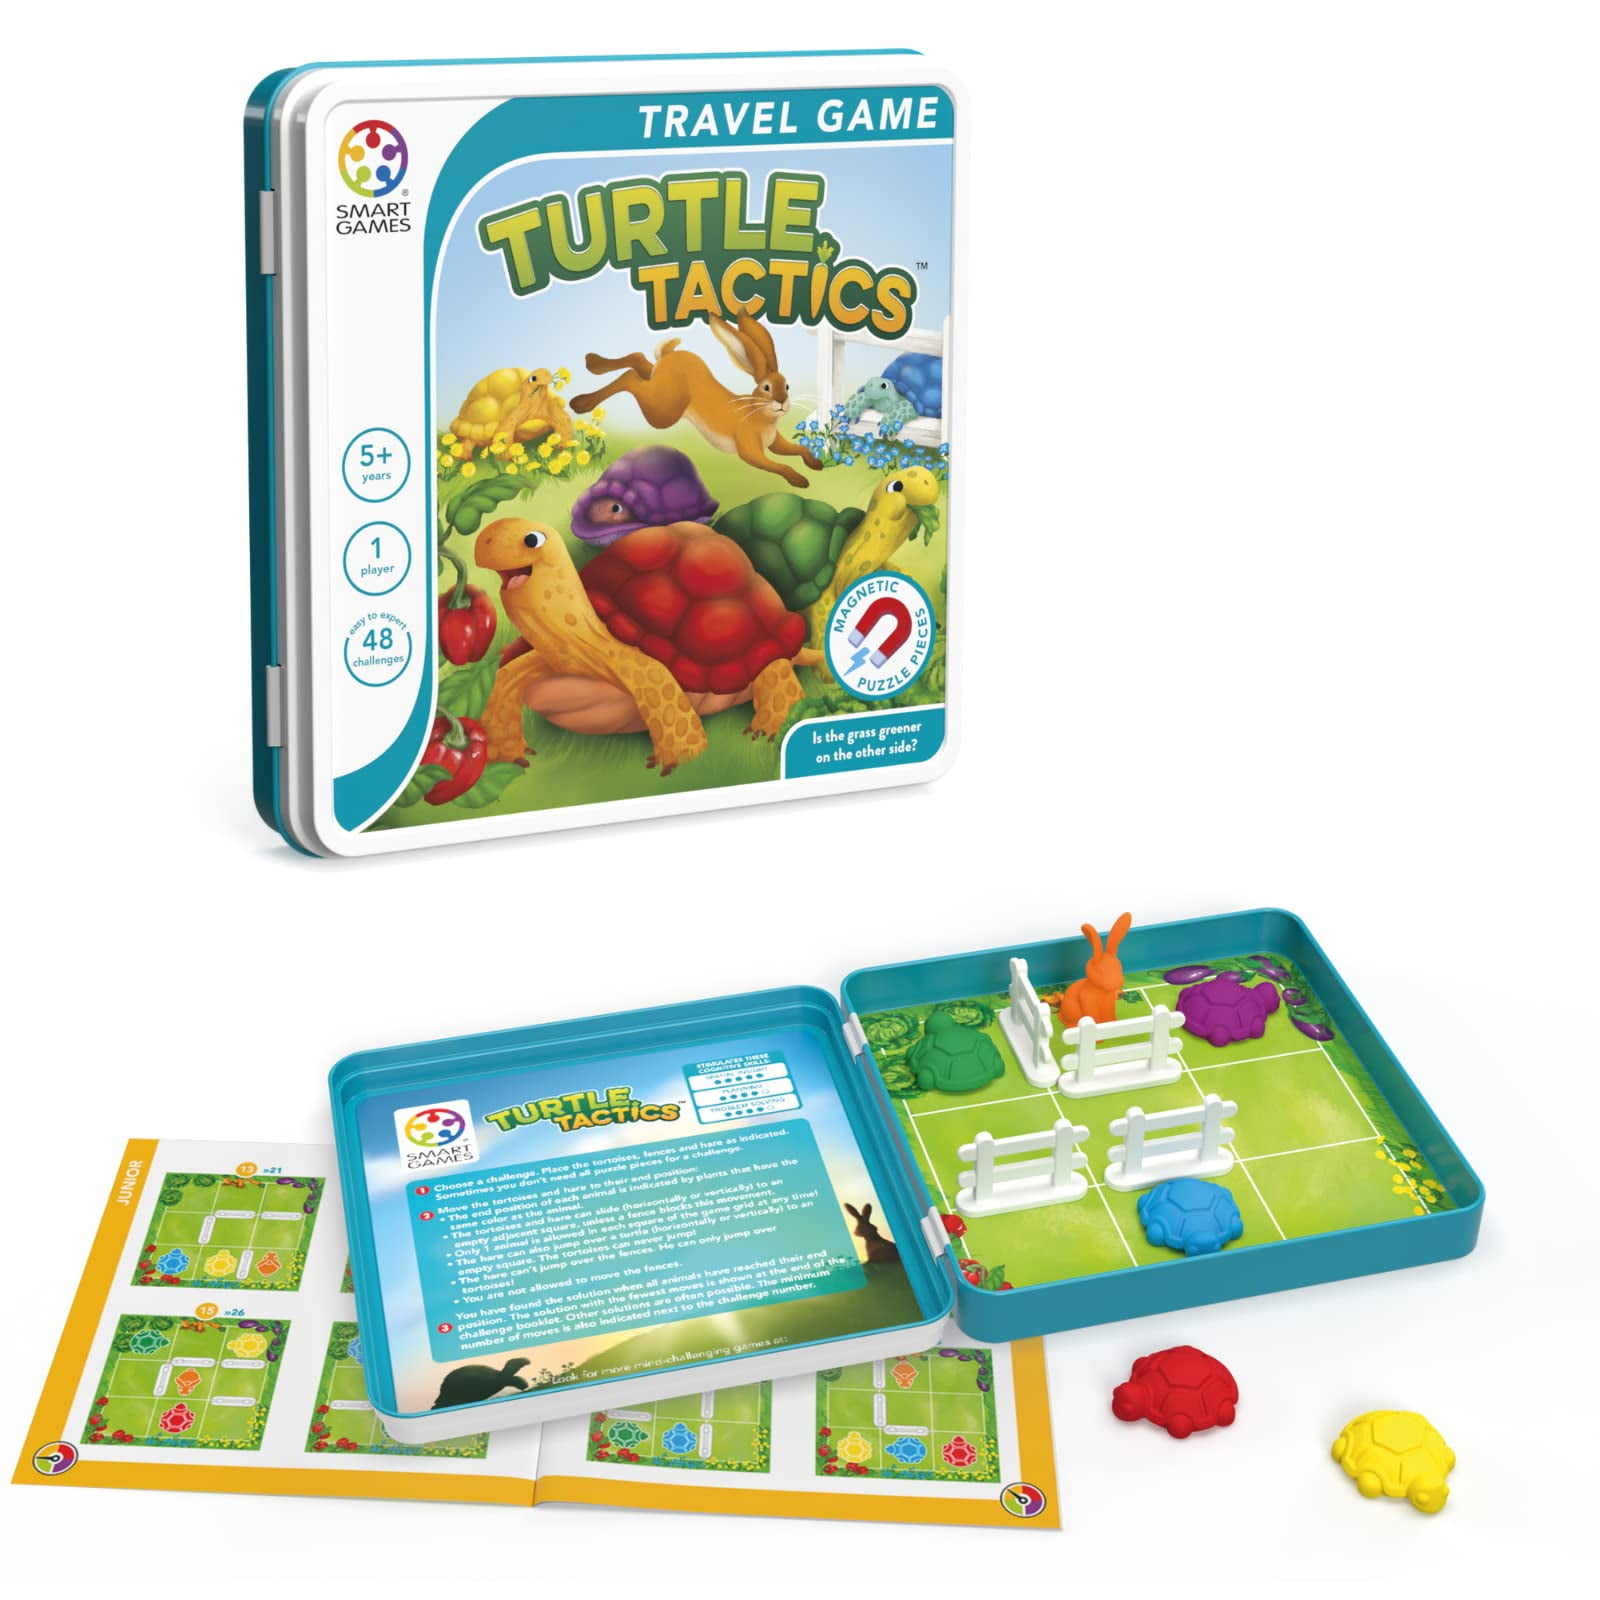 SmartGames Jump In' Travel Toy Board Game for Kids Ages 7 to Adult